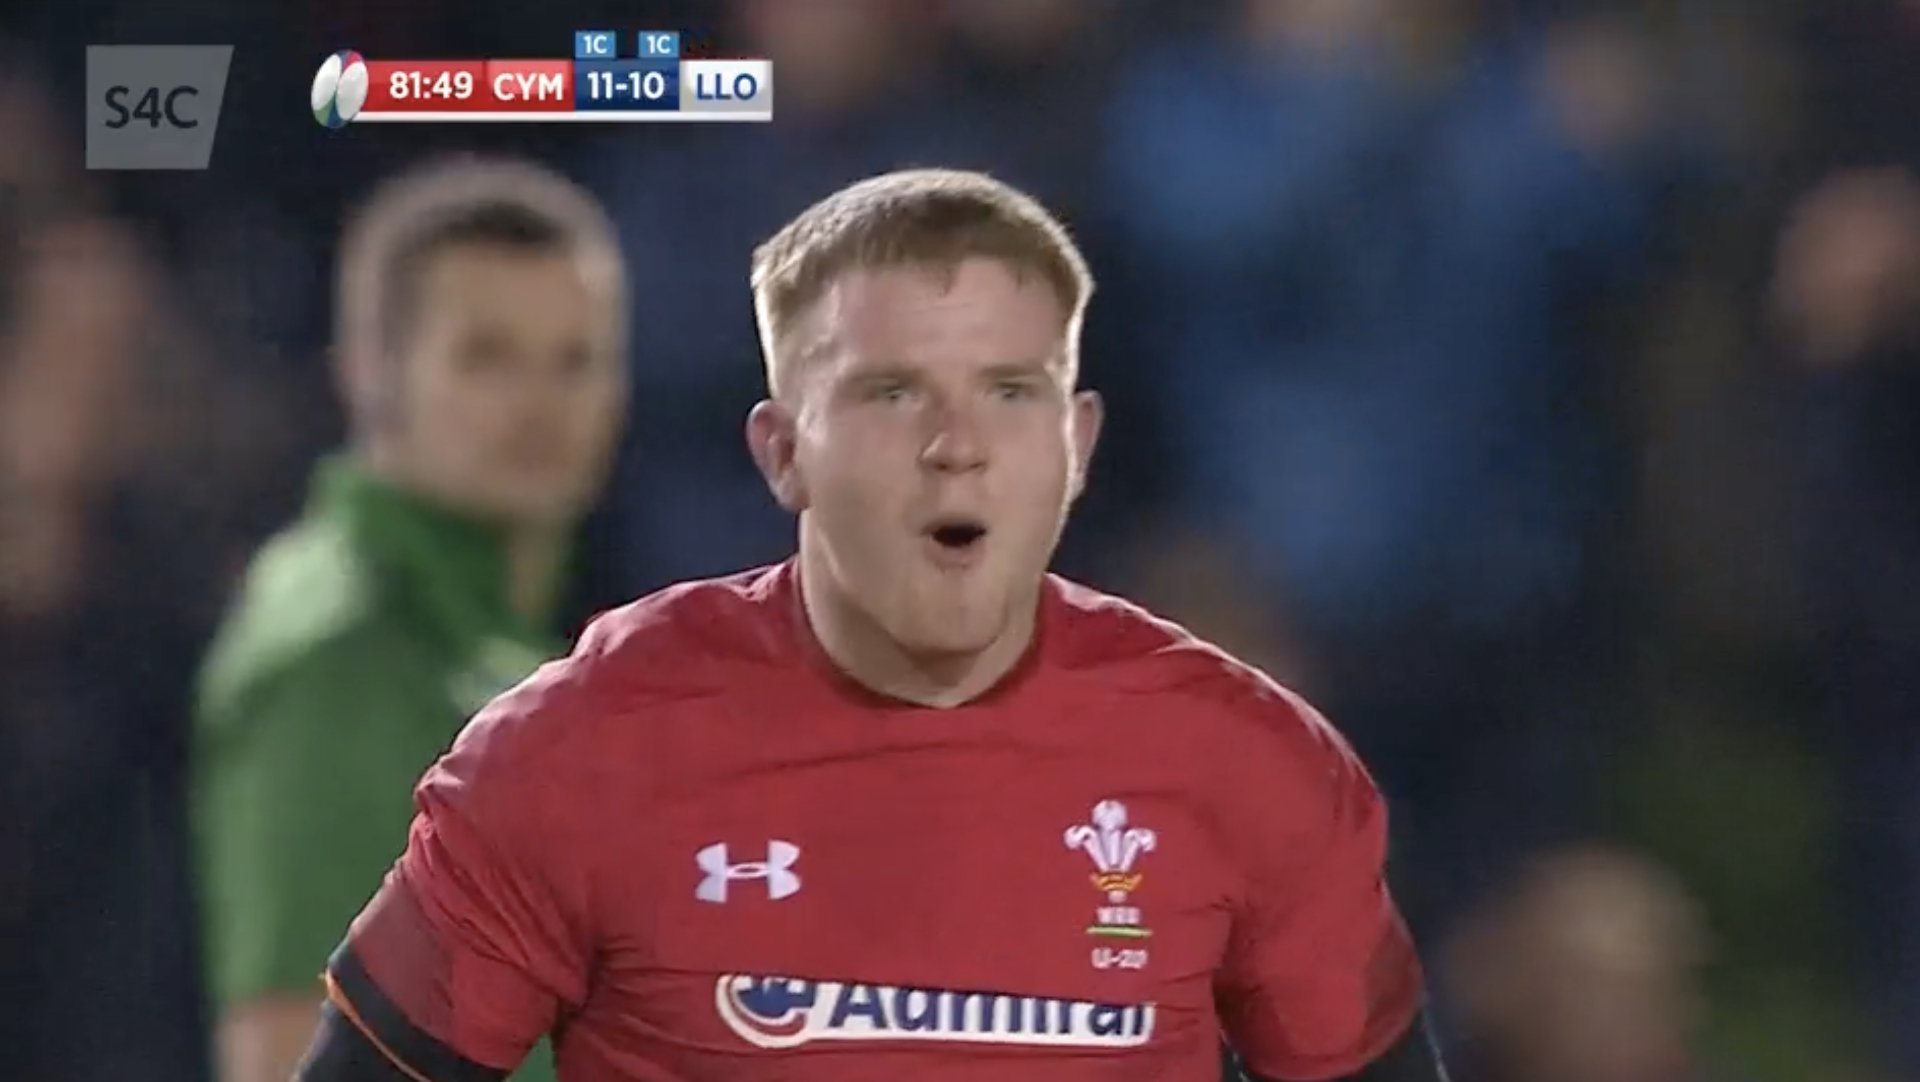 VIDEO: Welsh Under 20's beat English in the final play in foreshadowing of tomorrow's game